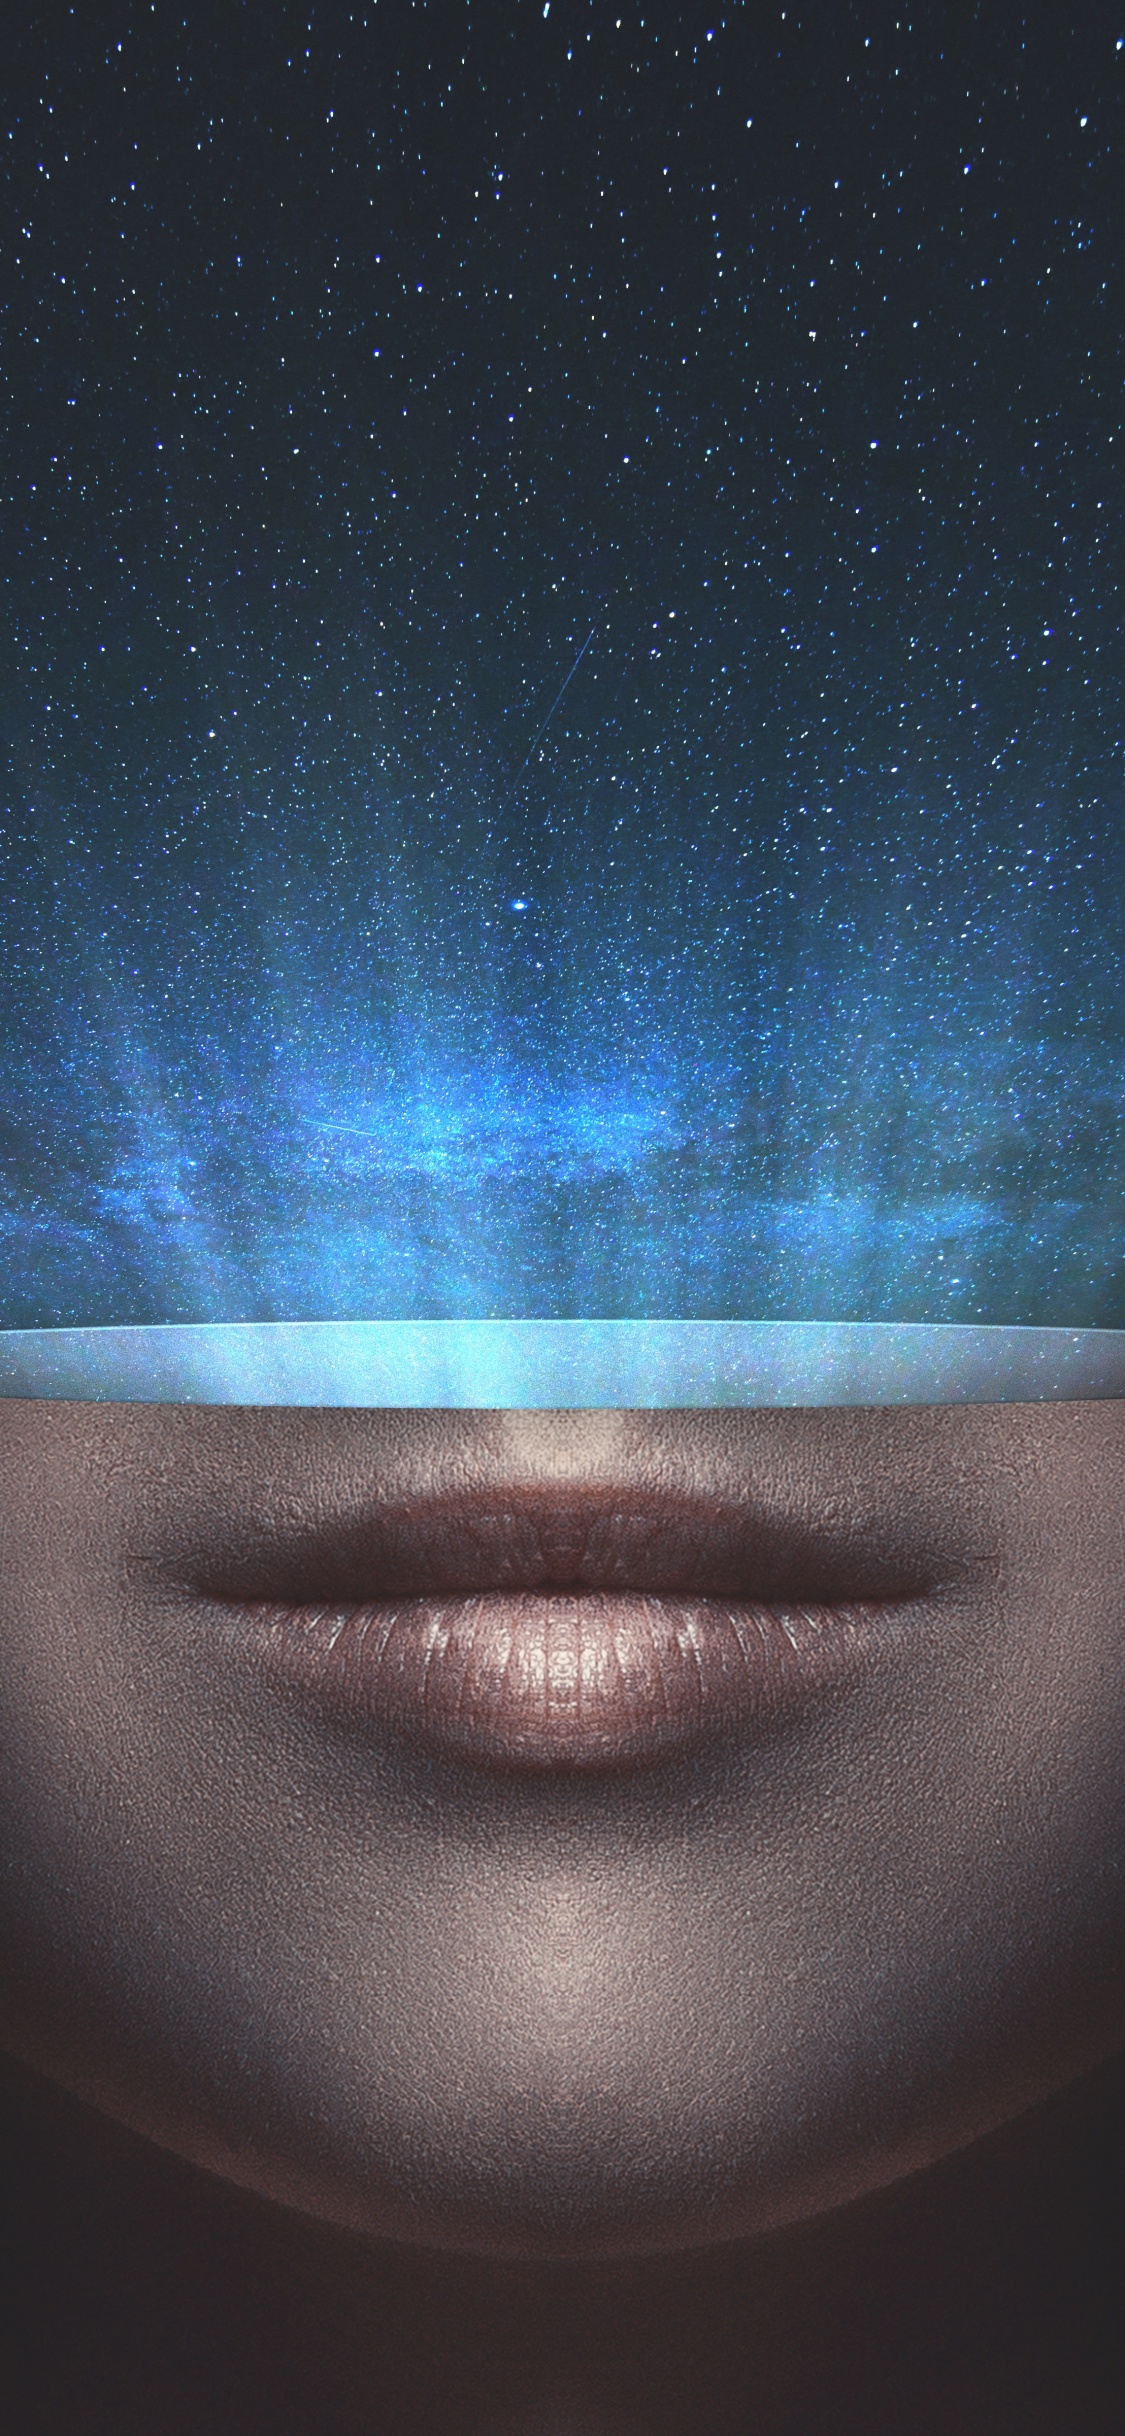 Persons Face With Blue and White Stars. Wallpaper in 1125x2436 Resolution